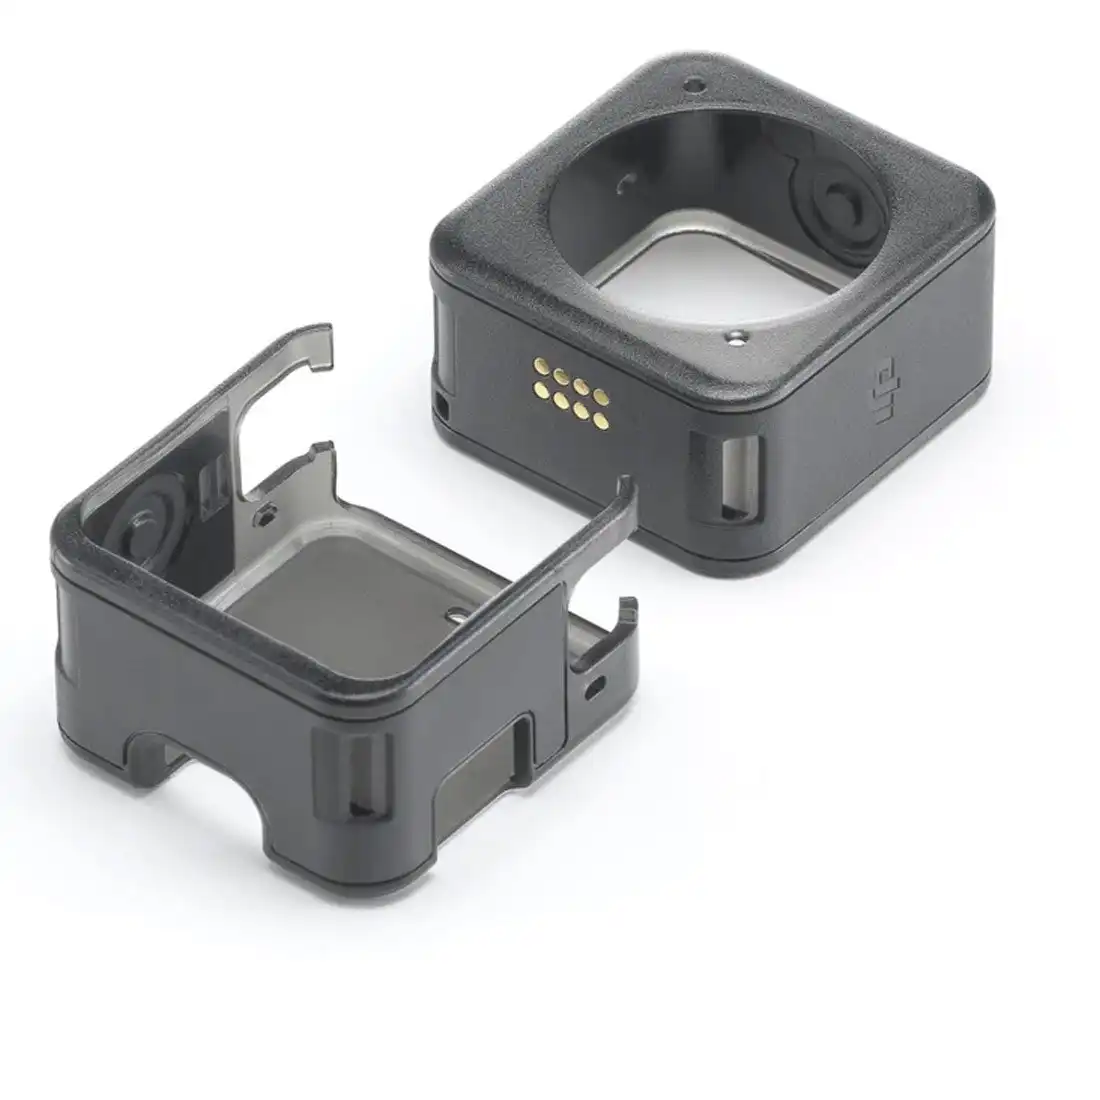 Dji Action 2 Magnetic Protective Case